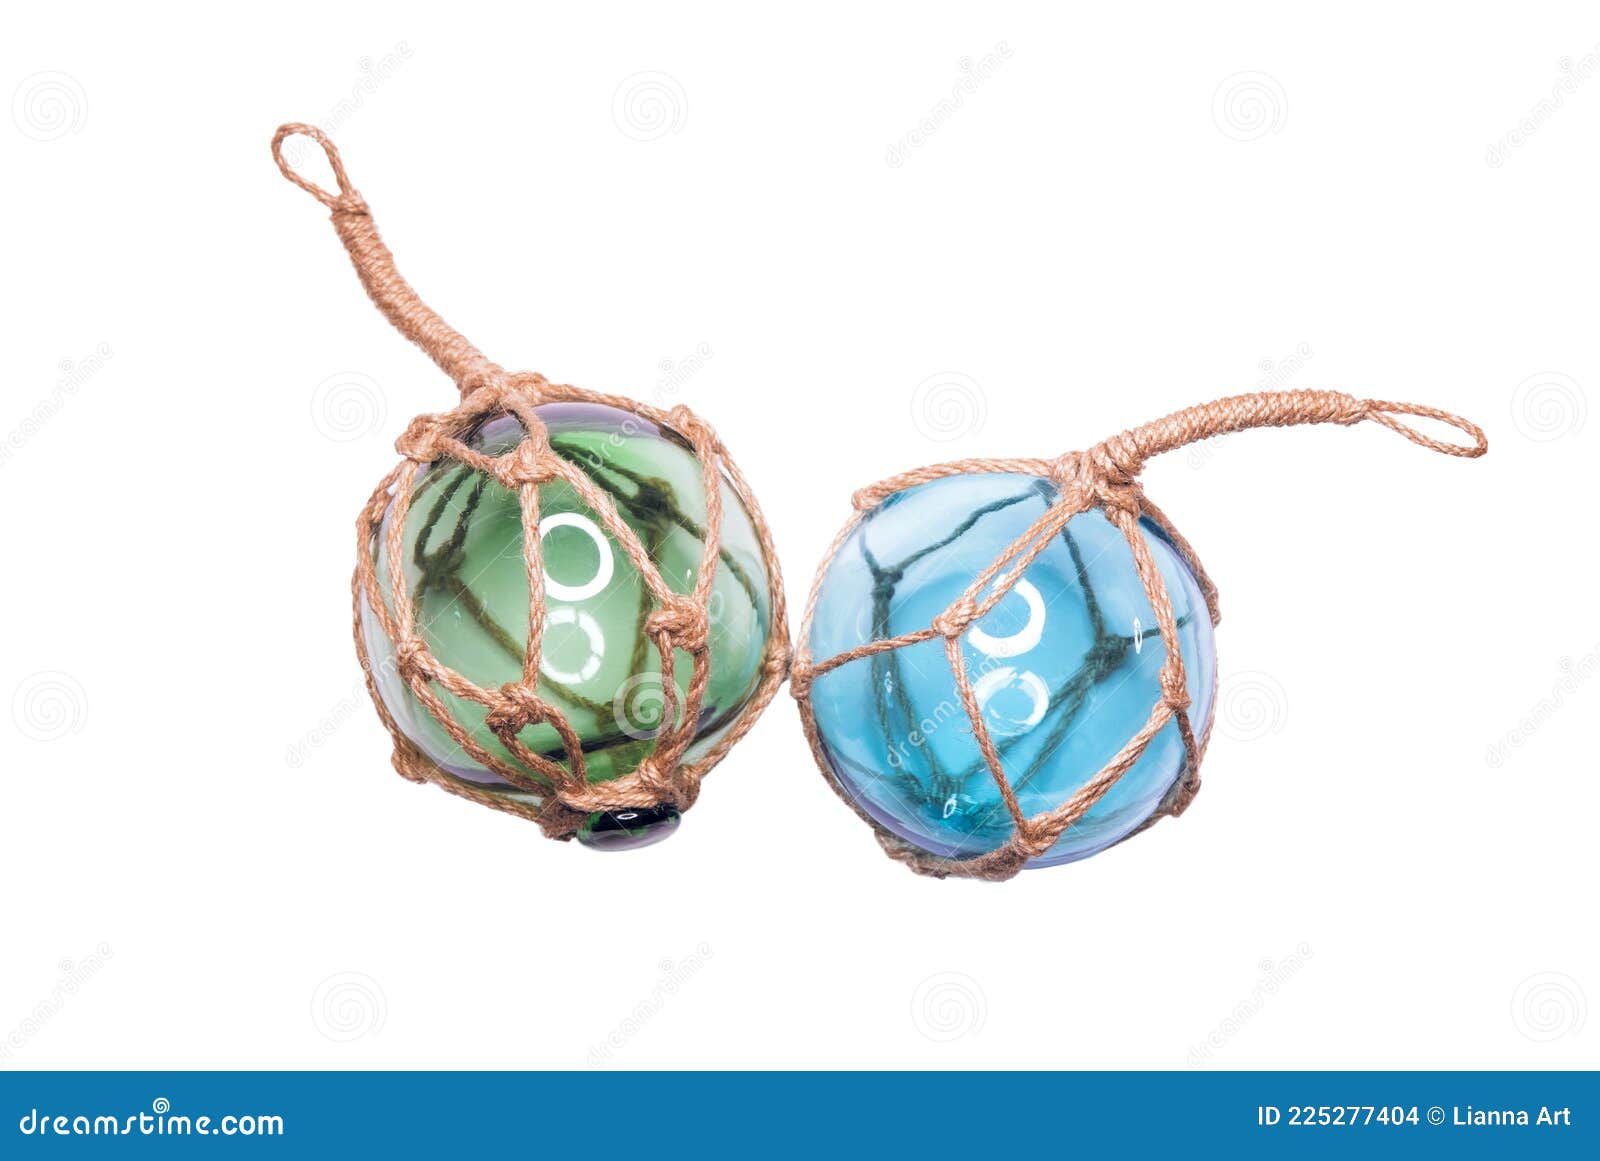 Glass Fishing Round Buoys. Two Glass Spheres with Ropes Isolated